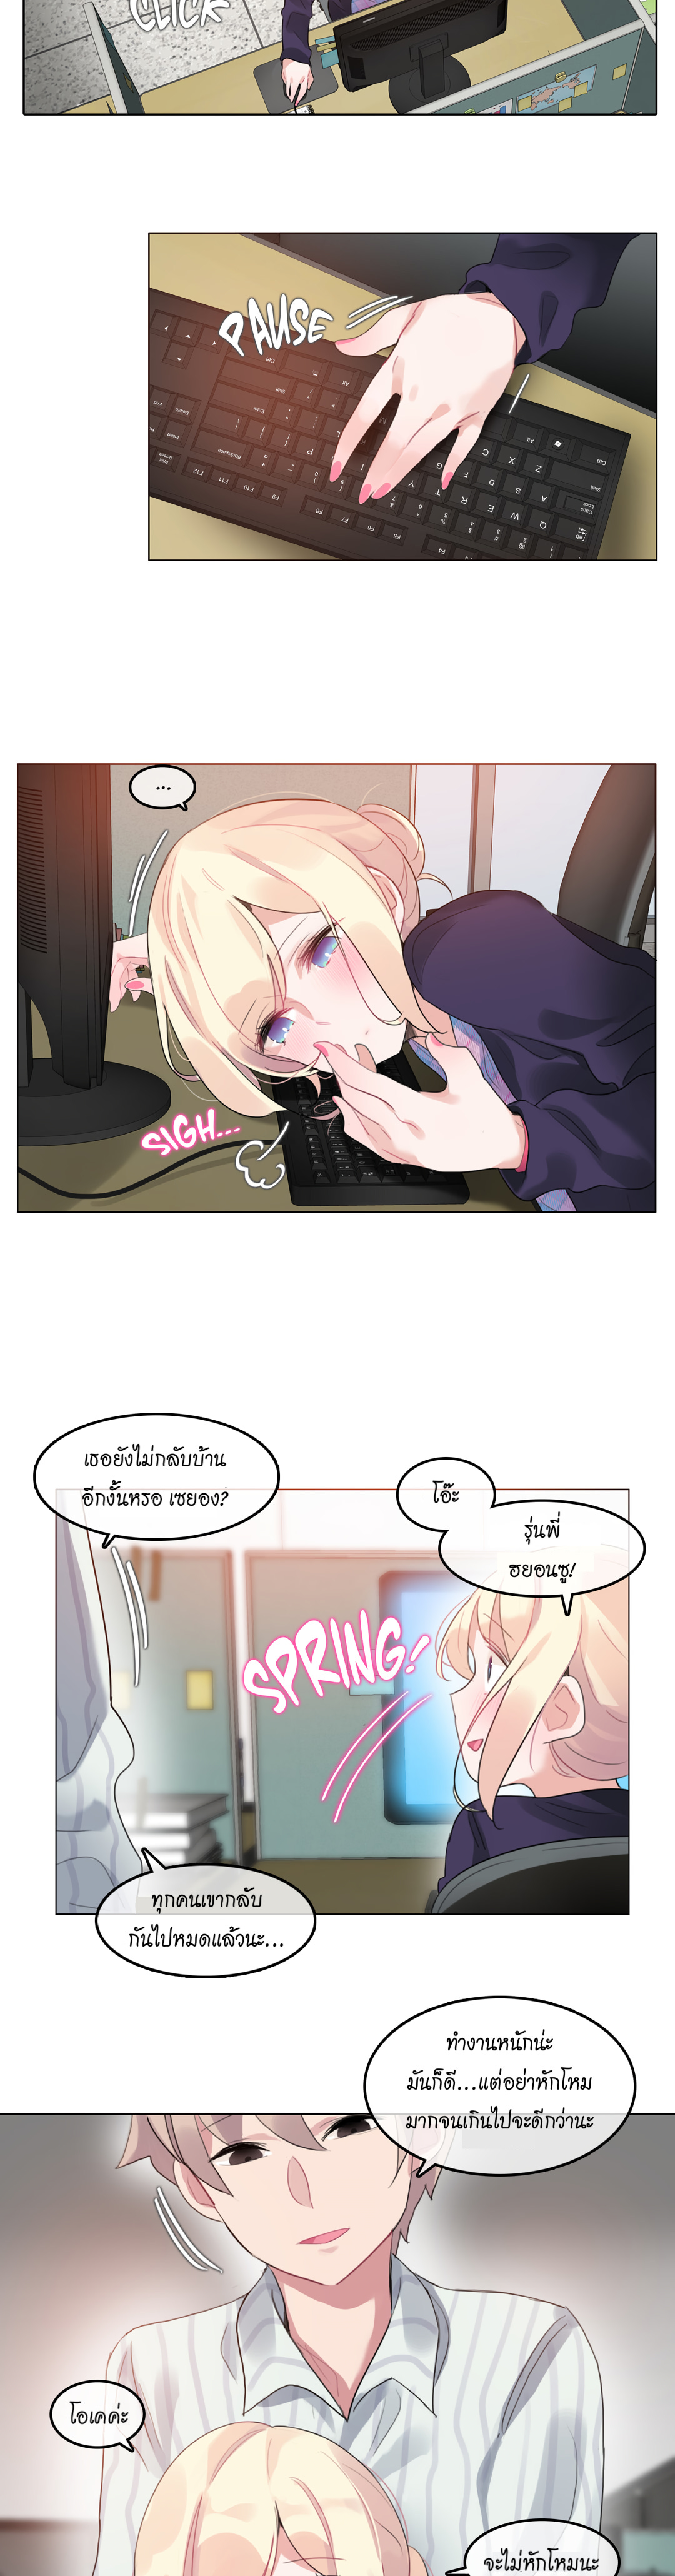 A Pervert’s Daily Life52 (10)